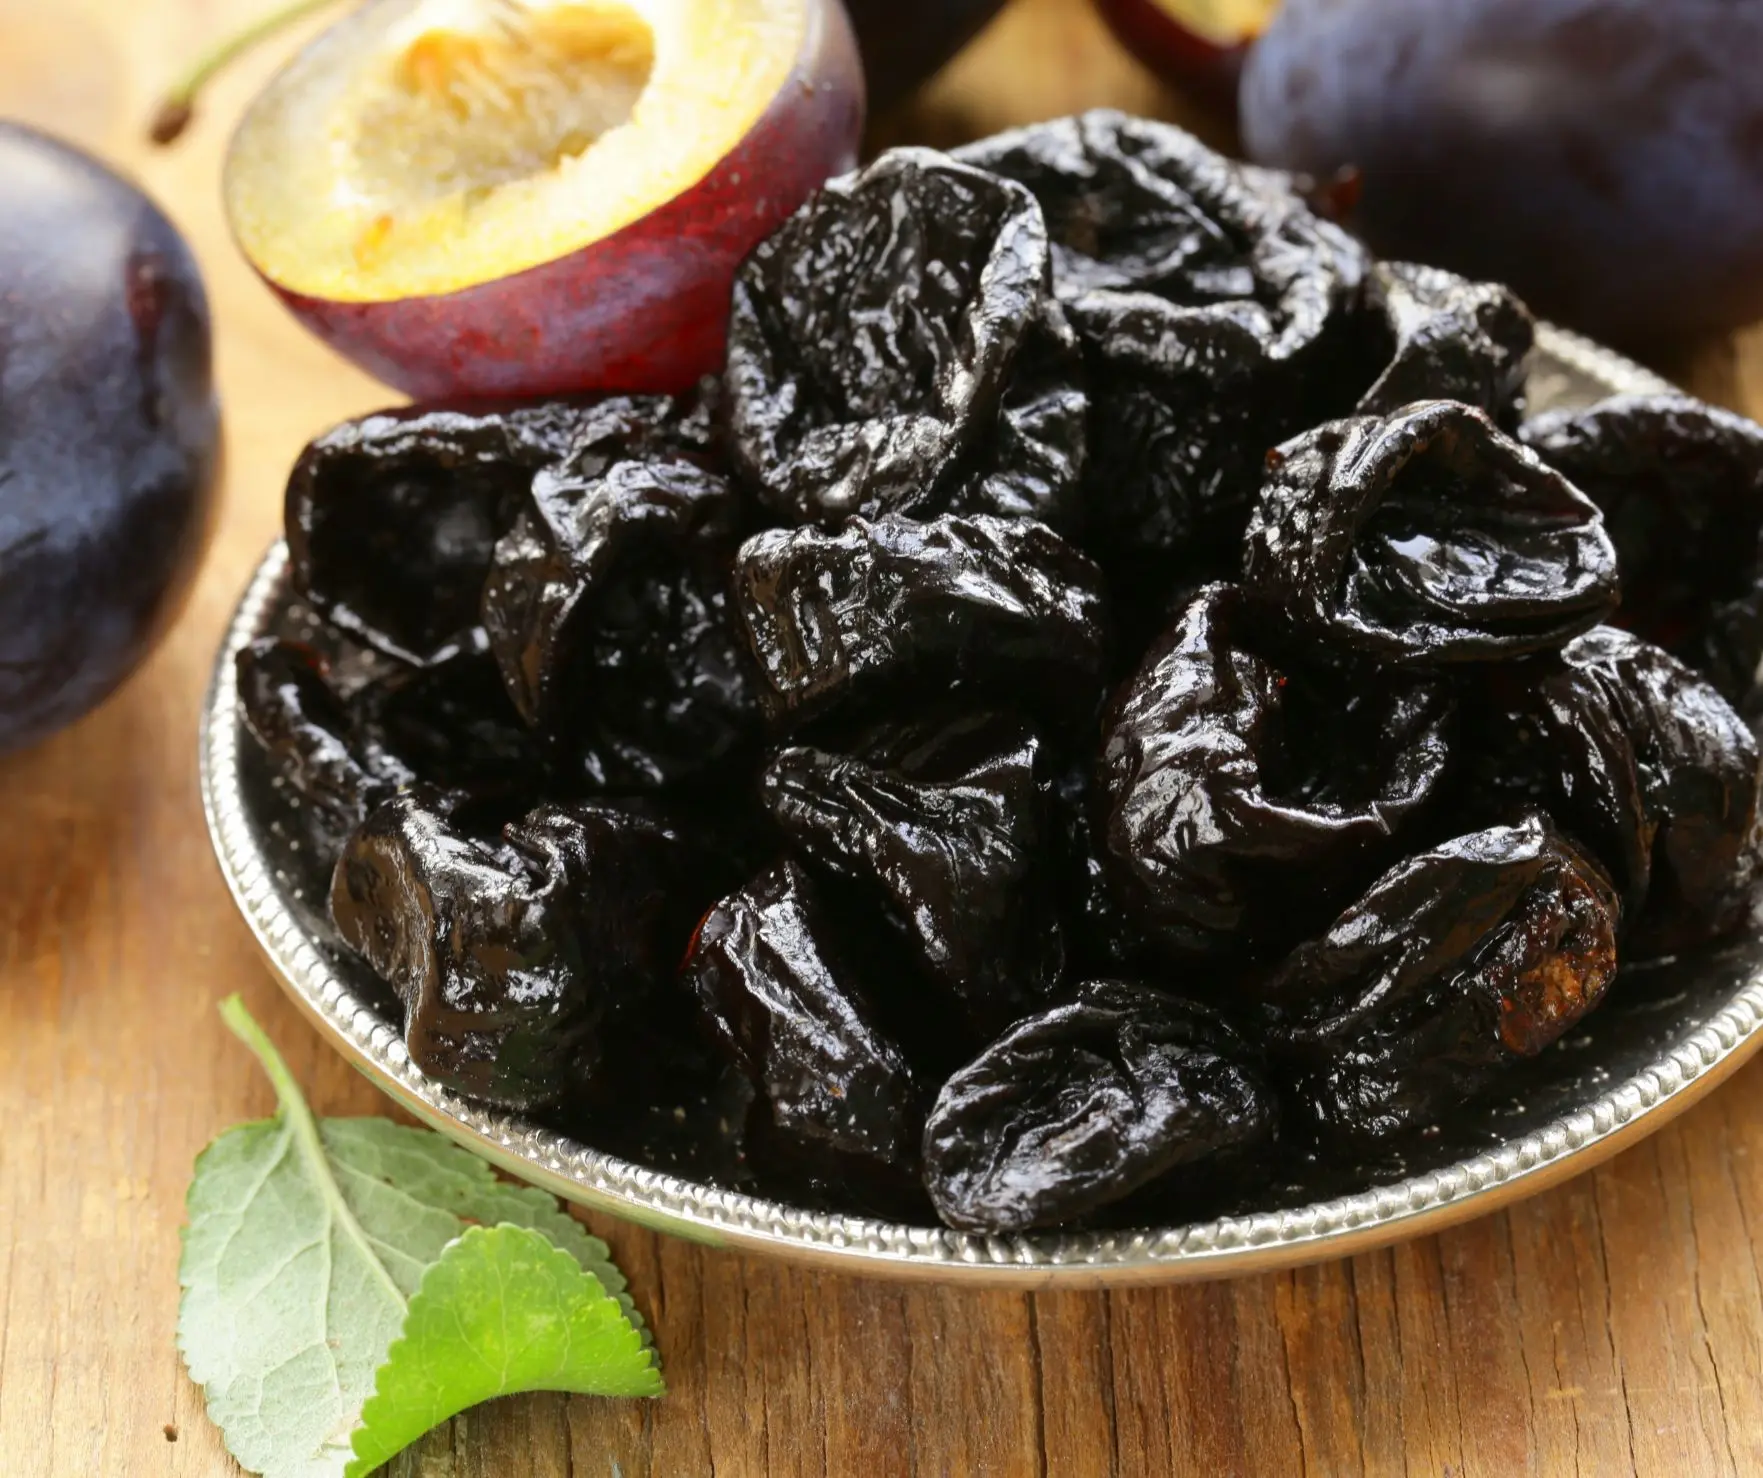 Eating a few prunes before bed can support a restful night.